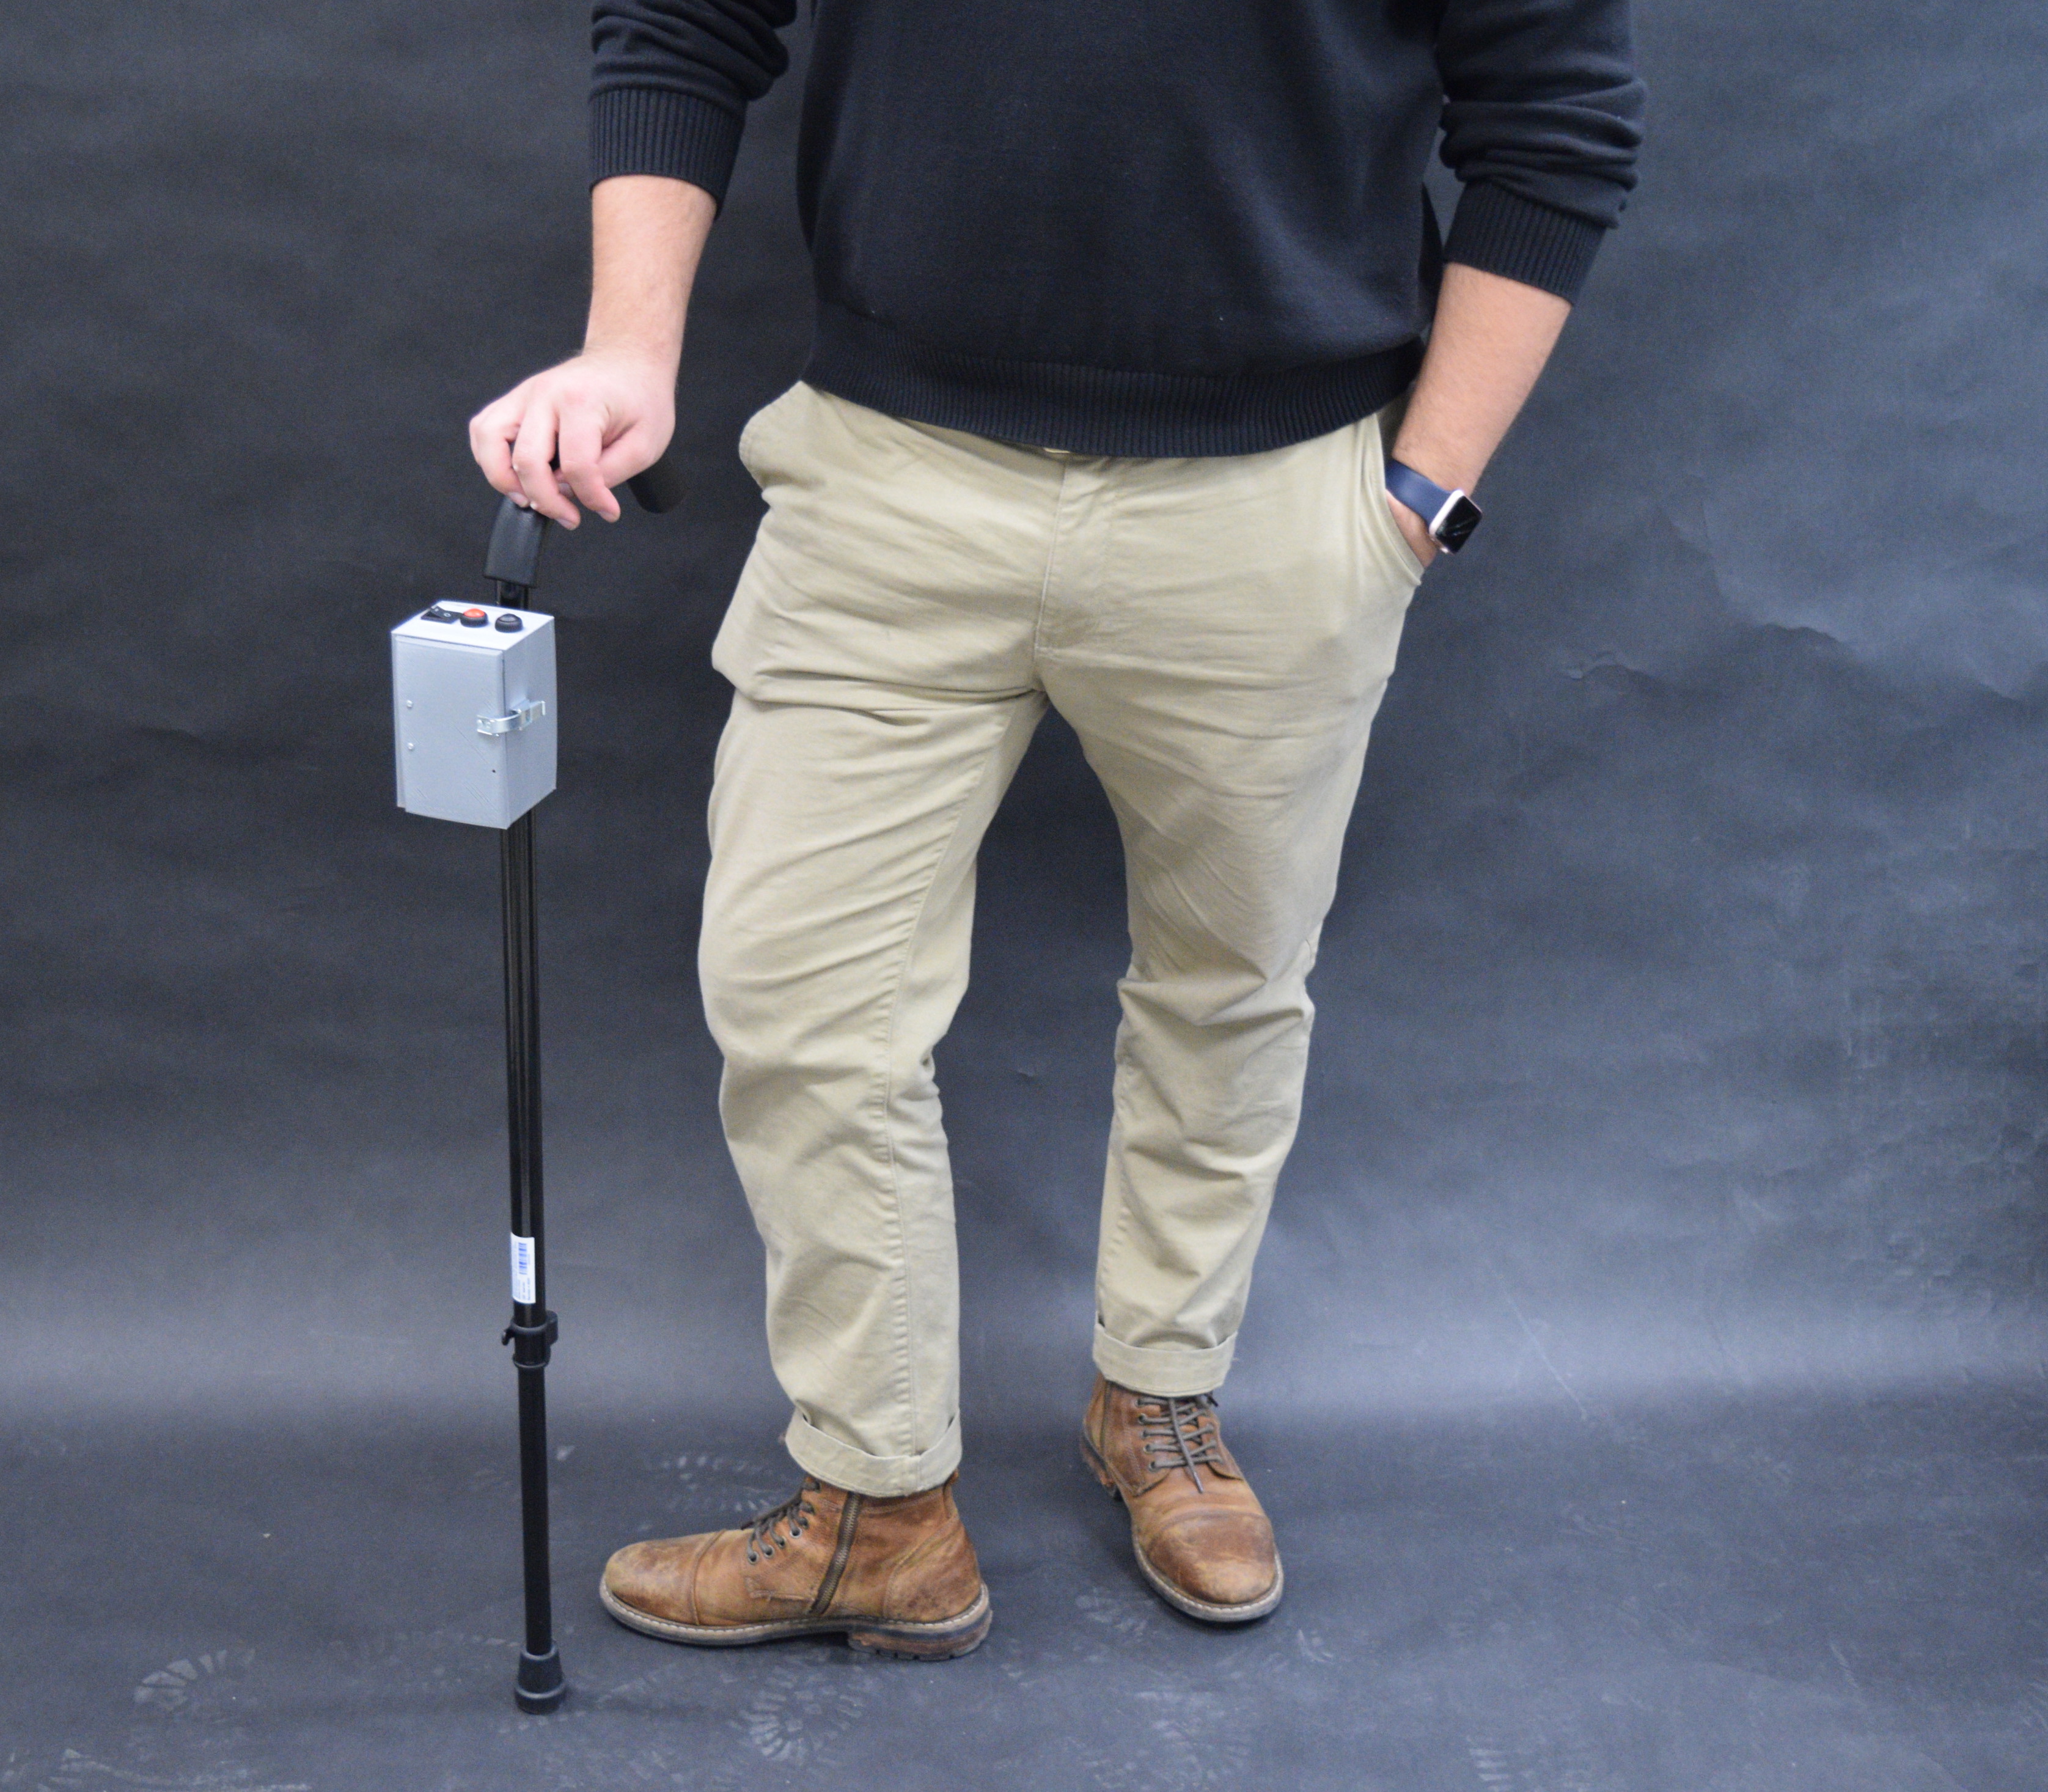 Photograph of a person posing with a cane; the cane has a medium-sized grey plastic box affixed near the top.